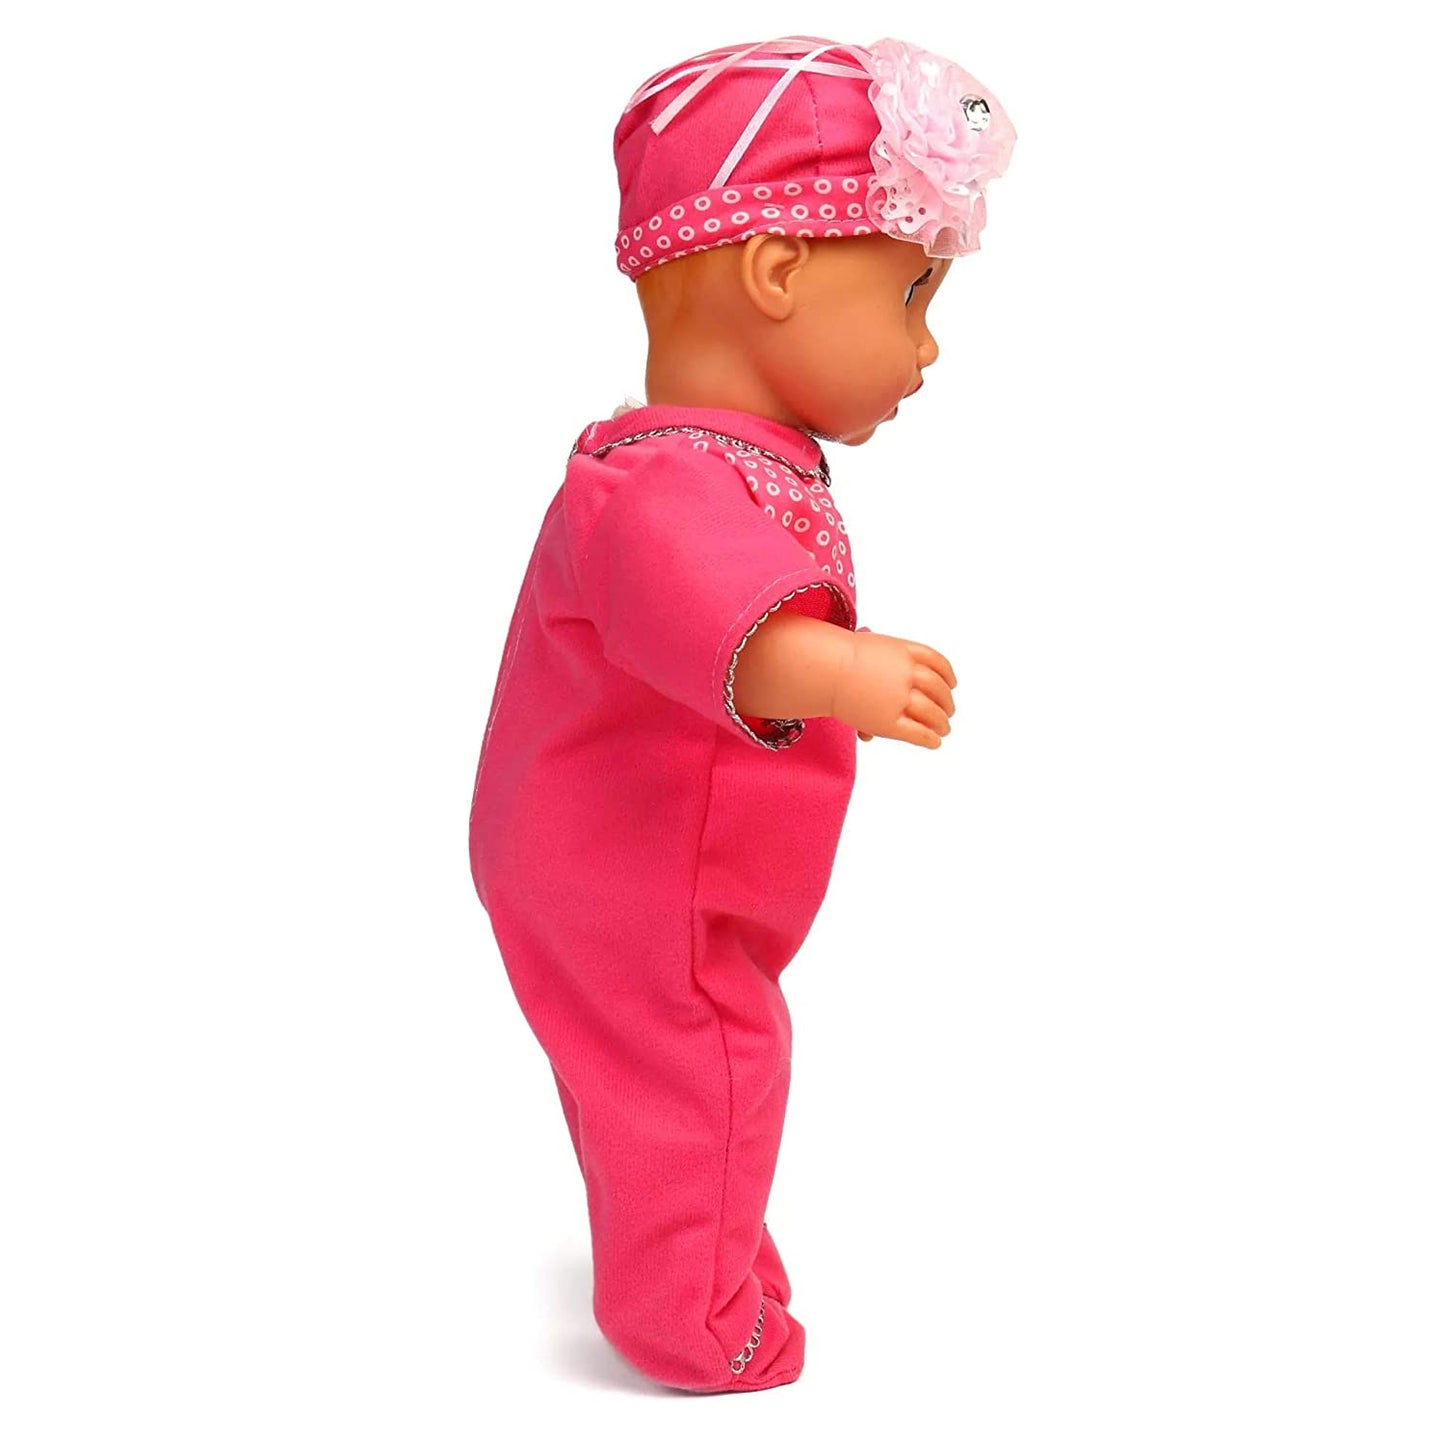 Speedage Princess Doll Lifelike Features 40 cm, Safe Materials, Inspires Creativity - Perfect Gift for Girls Aged 3-10 - Pink